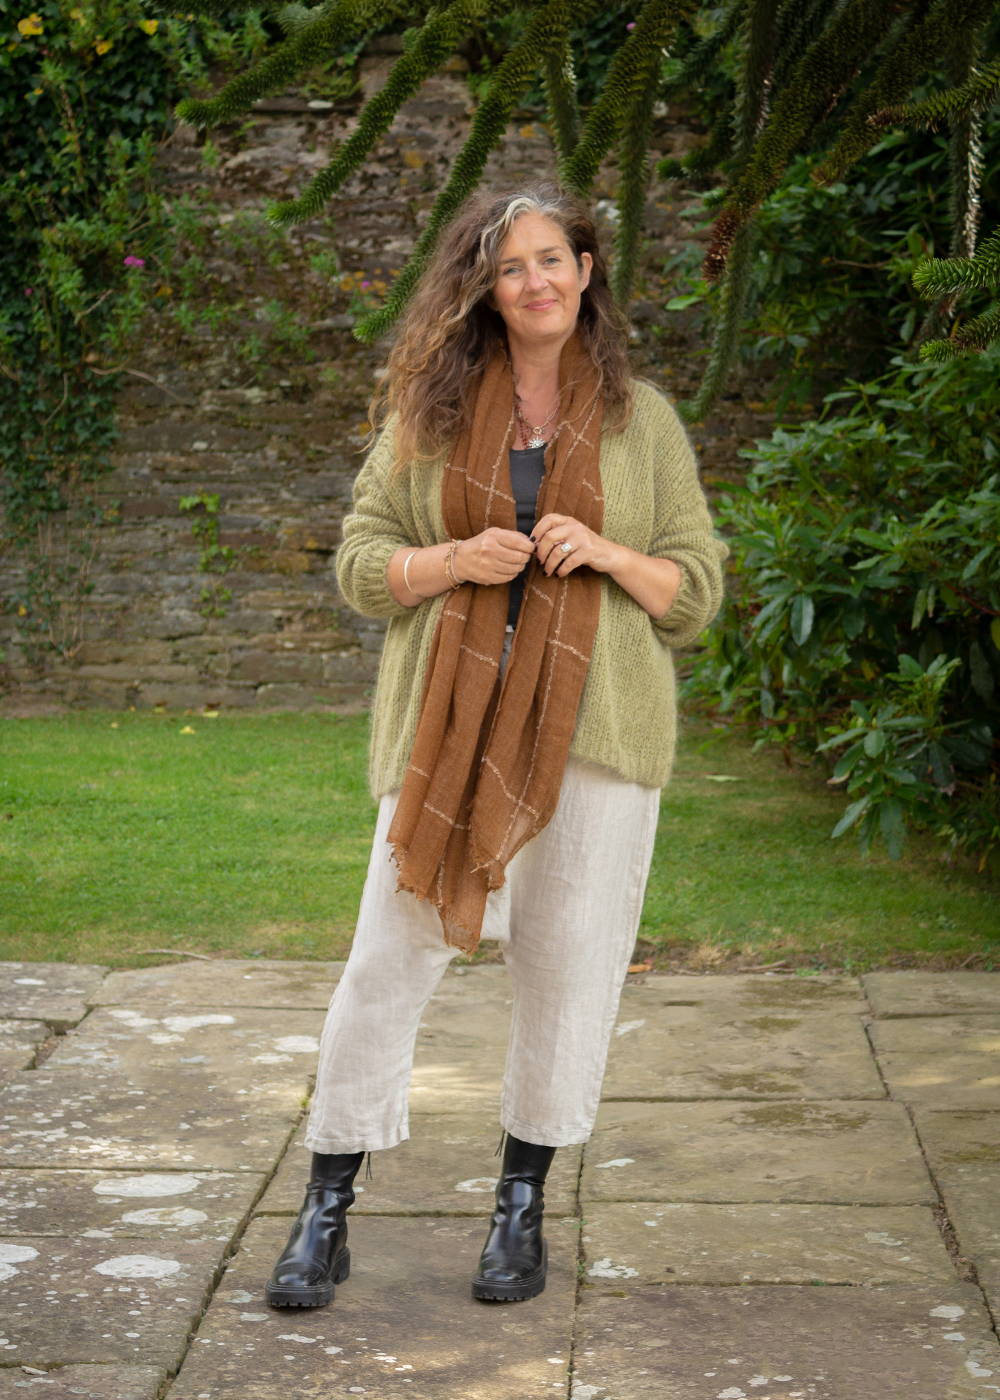 Emma wearing a green knitted cardigan, beige linen trousers and black boots.